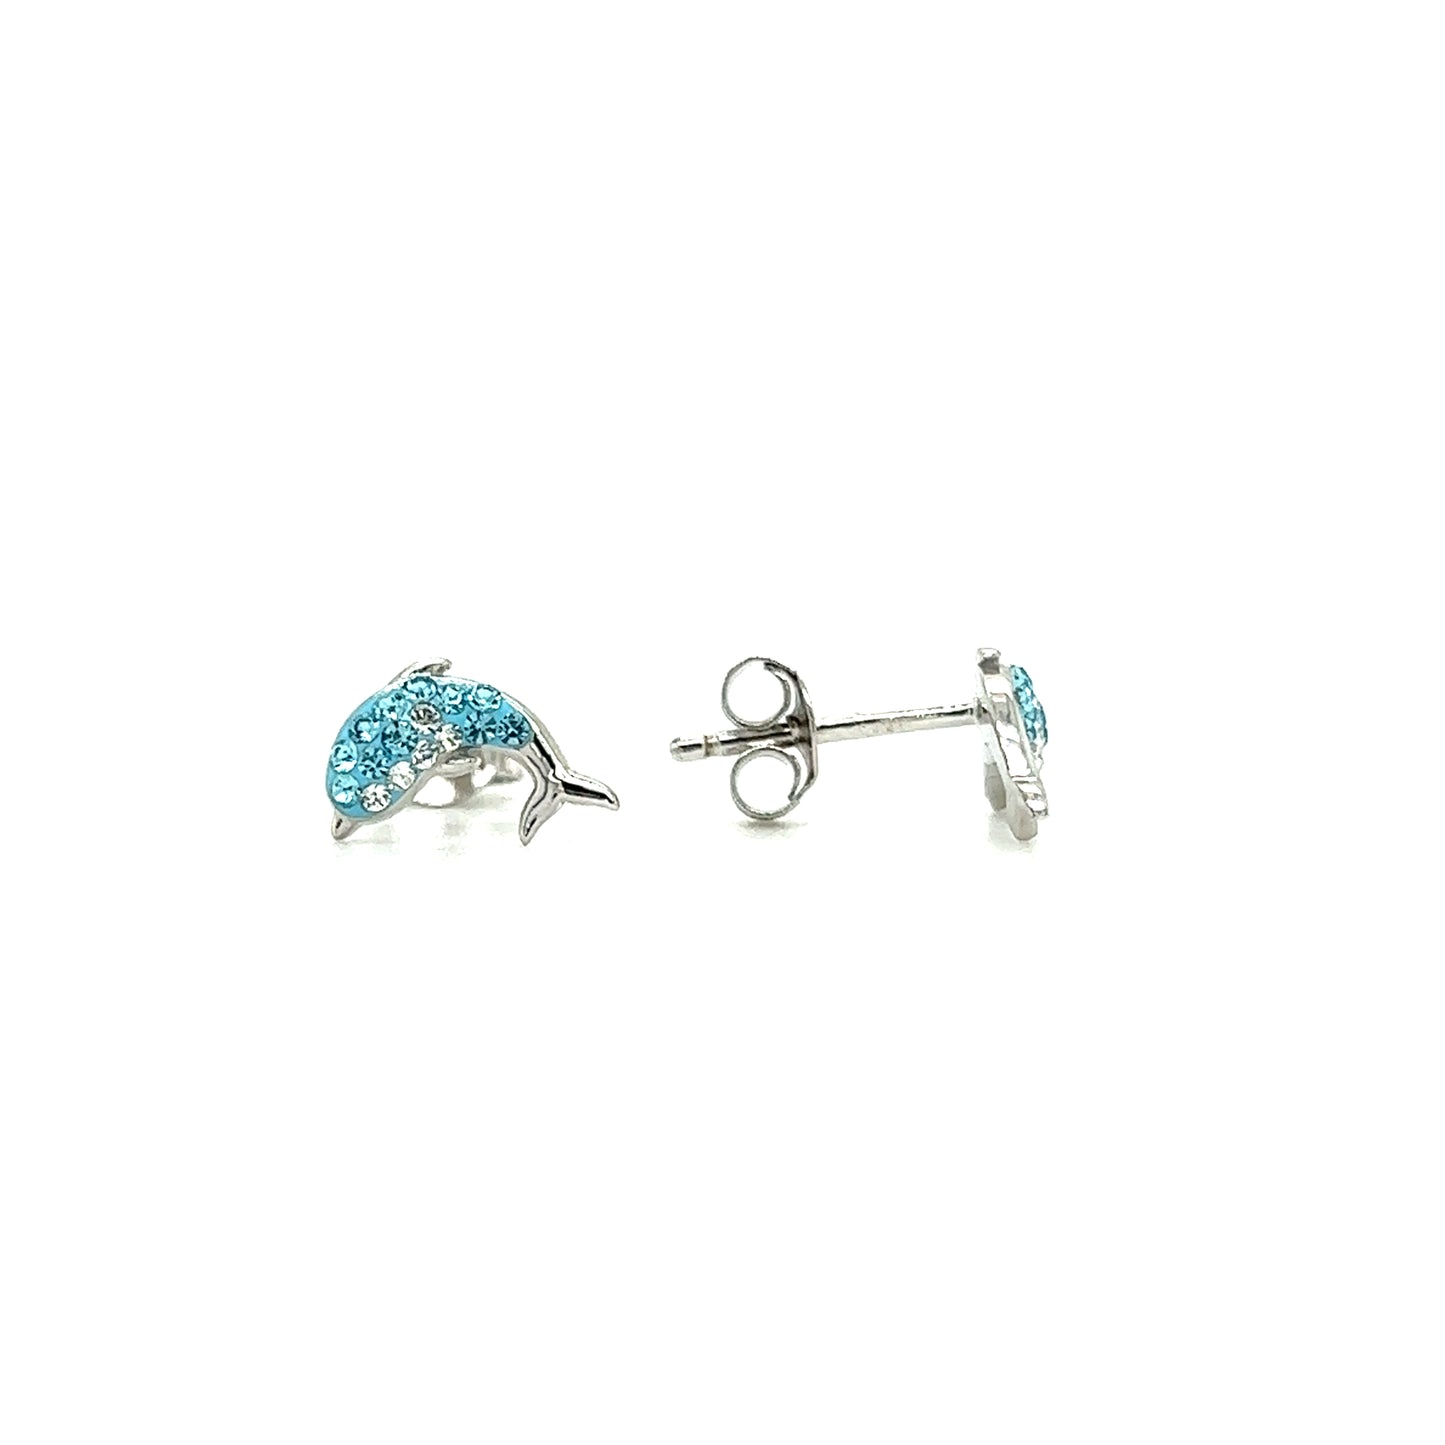 Dolphin Stud Earrings with Aqua and White Crystals in Sterling Silver Front and Side View